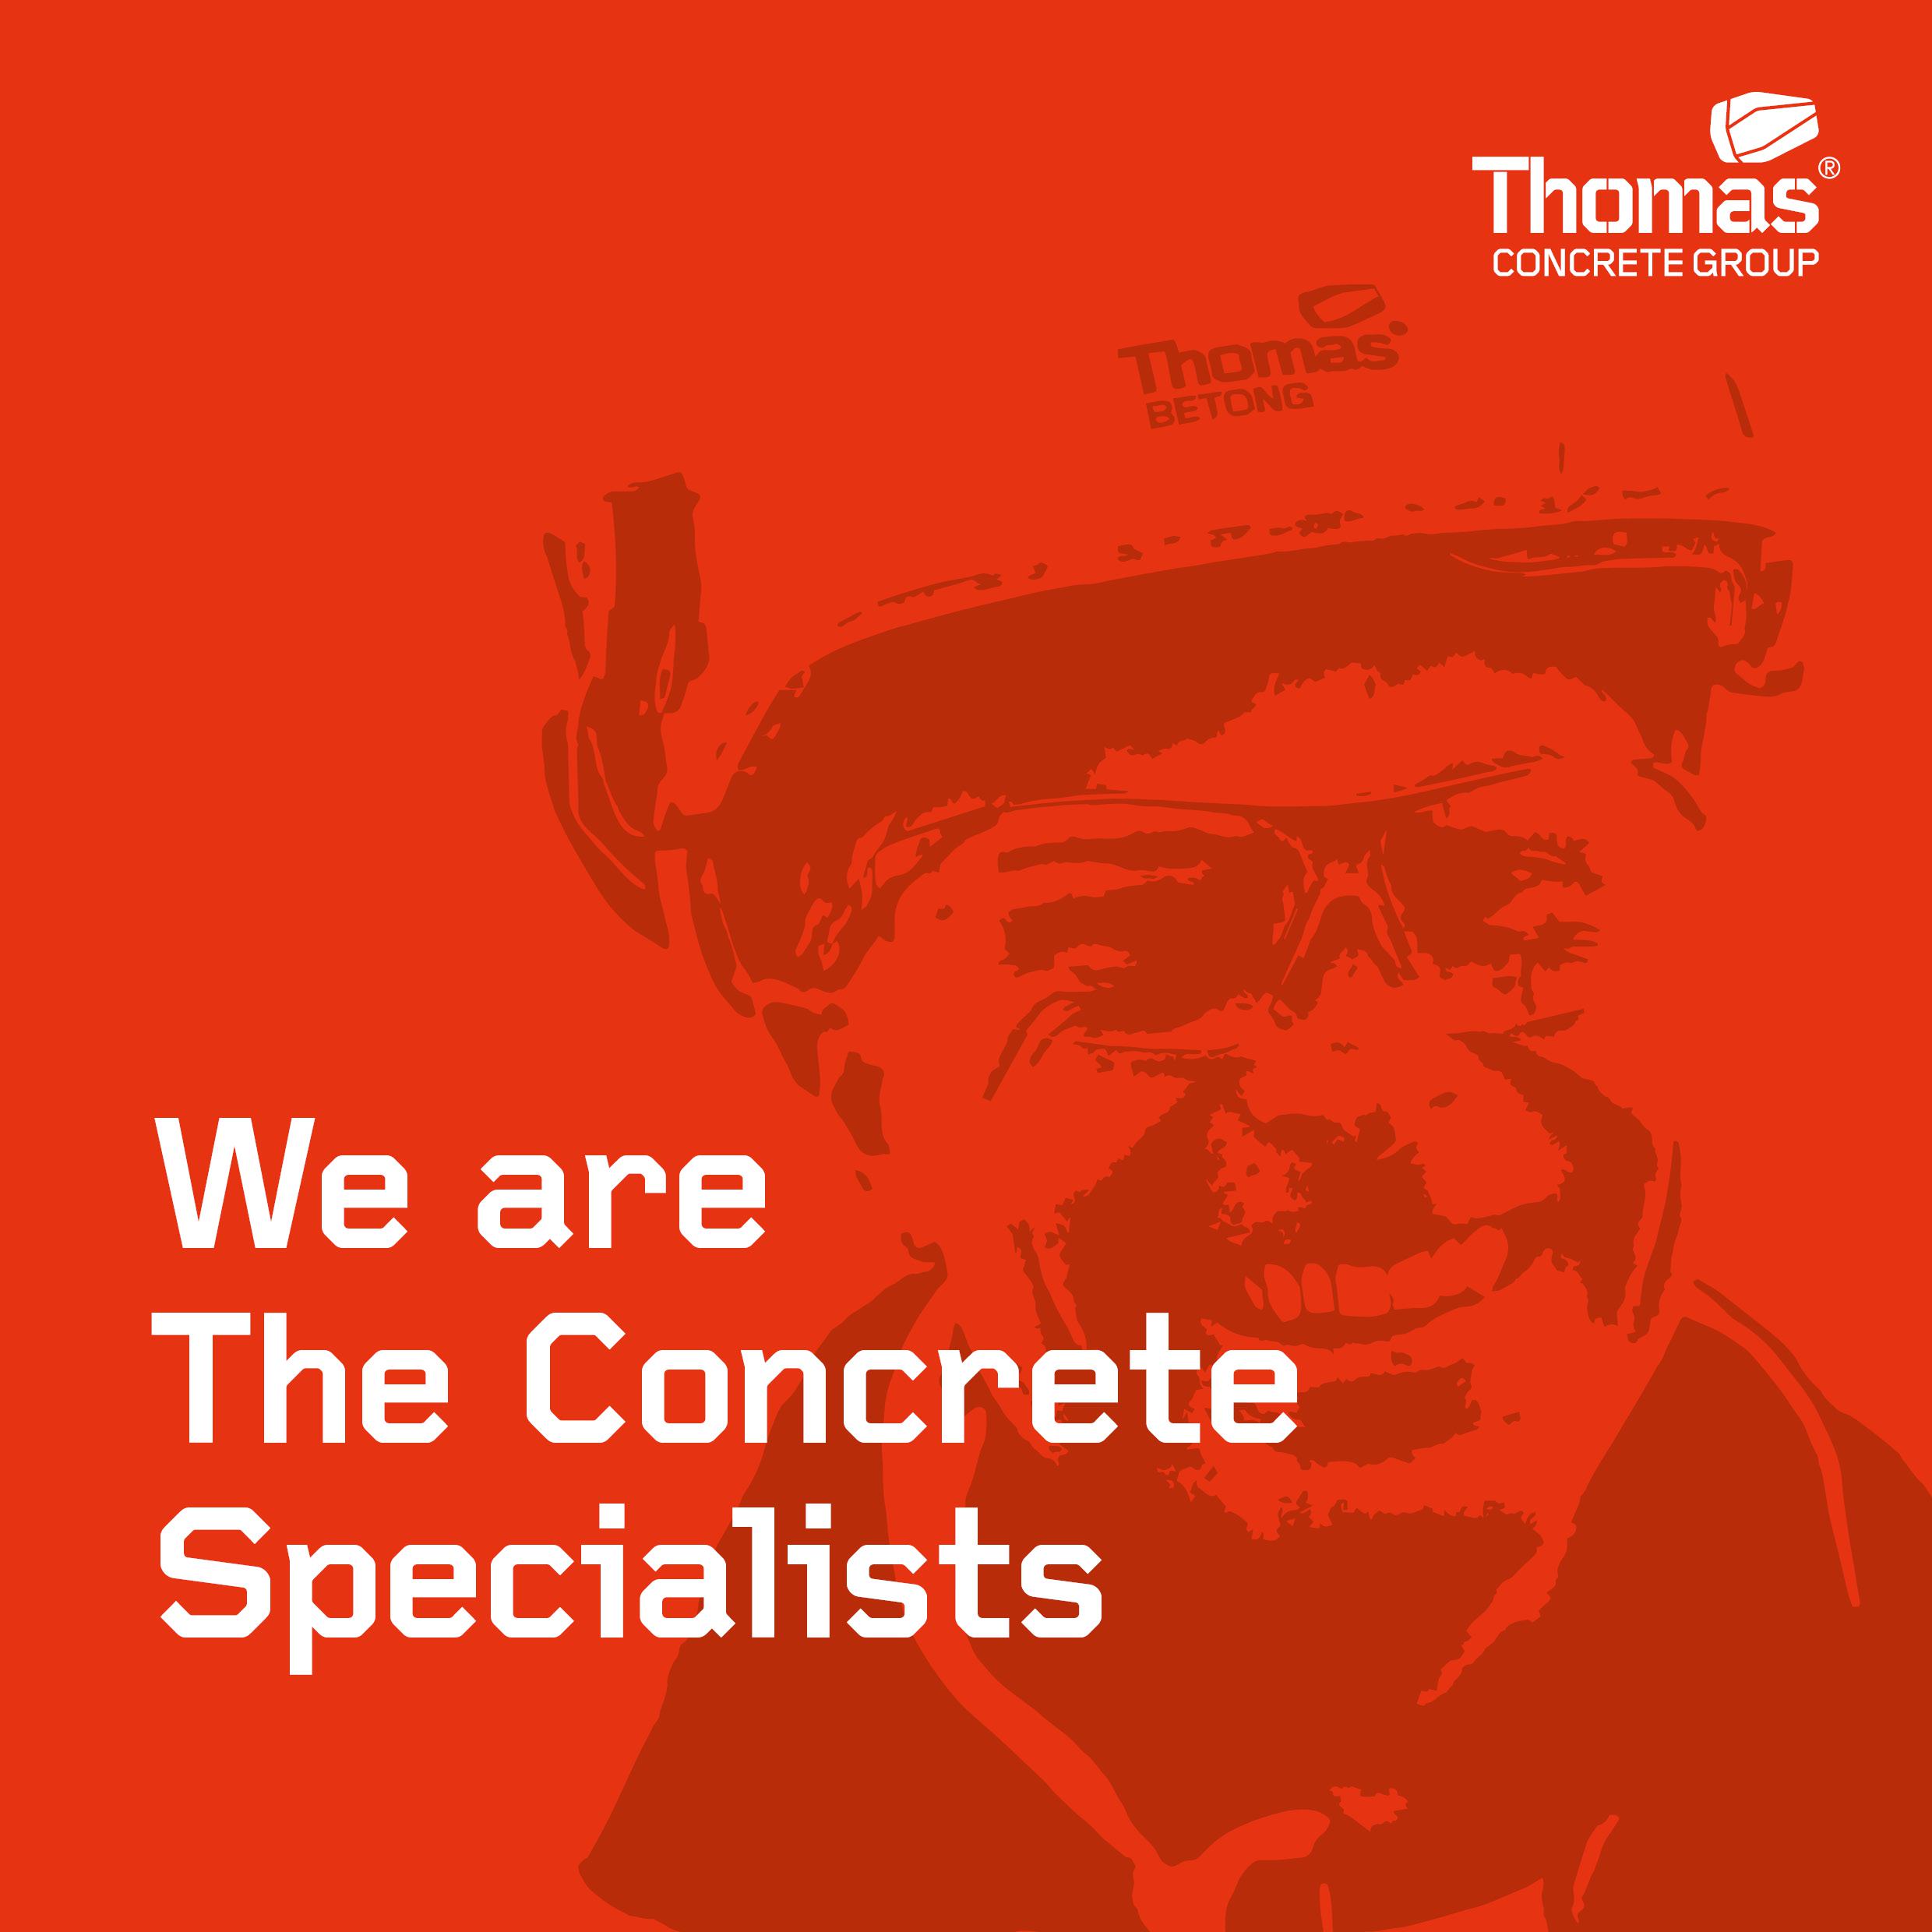 We are The Concrete Specialist